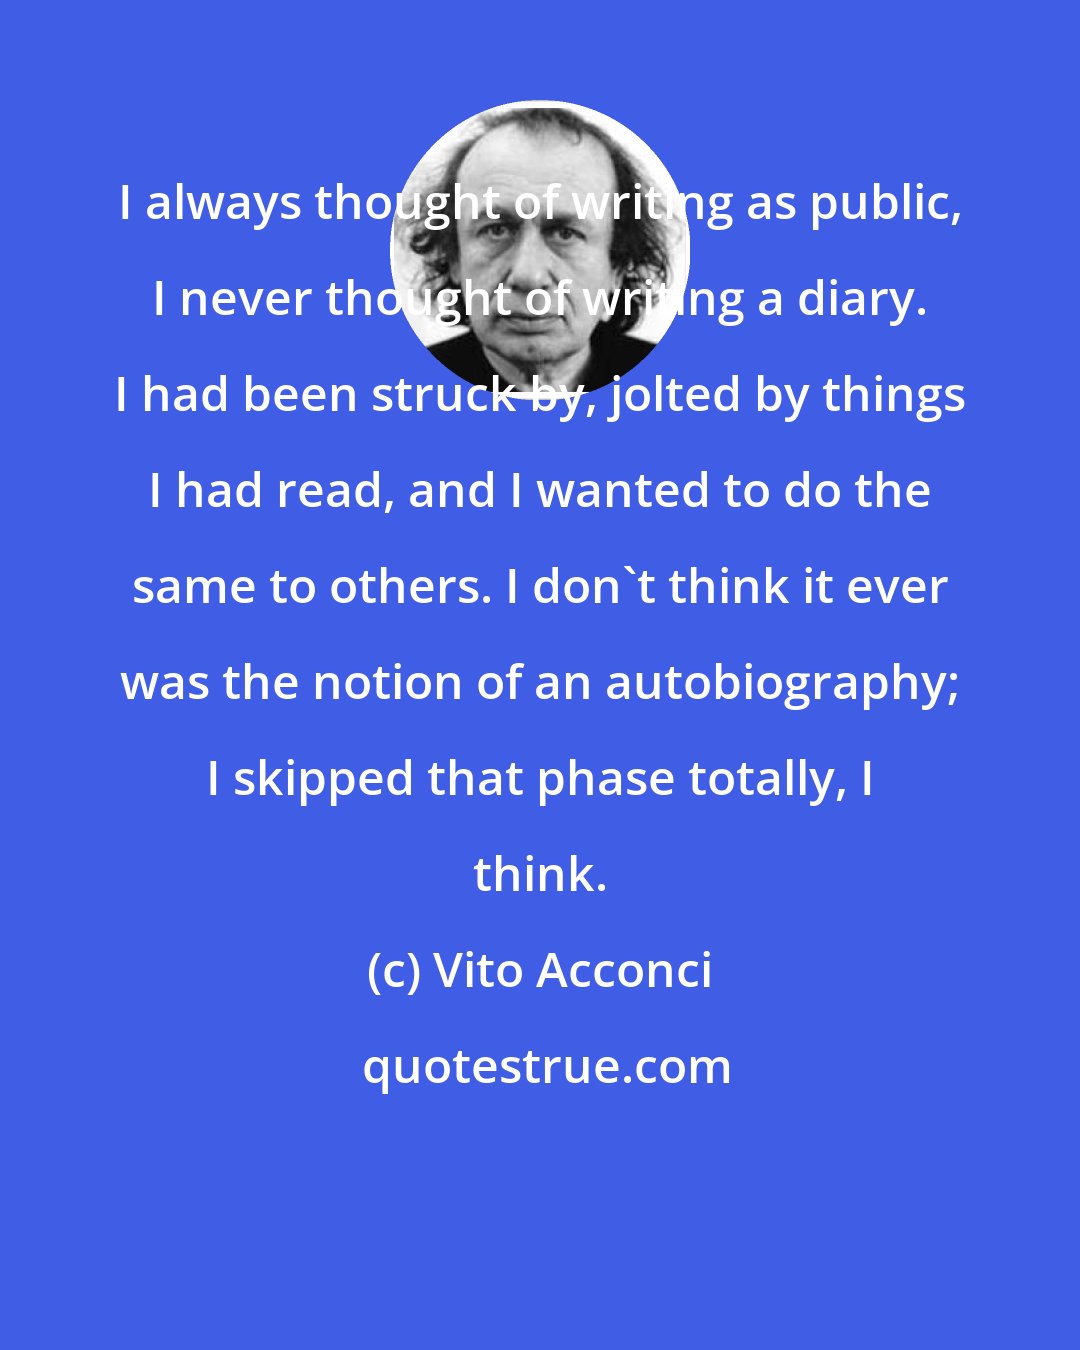 Vito Acconci: I always thought of writing as public, I never thought of writing a diary. I had been struck by, jolted by things I had read, and I wanted to do the same to others. I don't think it ever was the notion of an autobiography; I skipped that phase totally, I think.